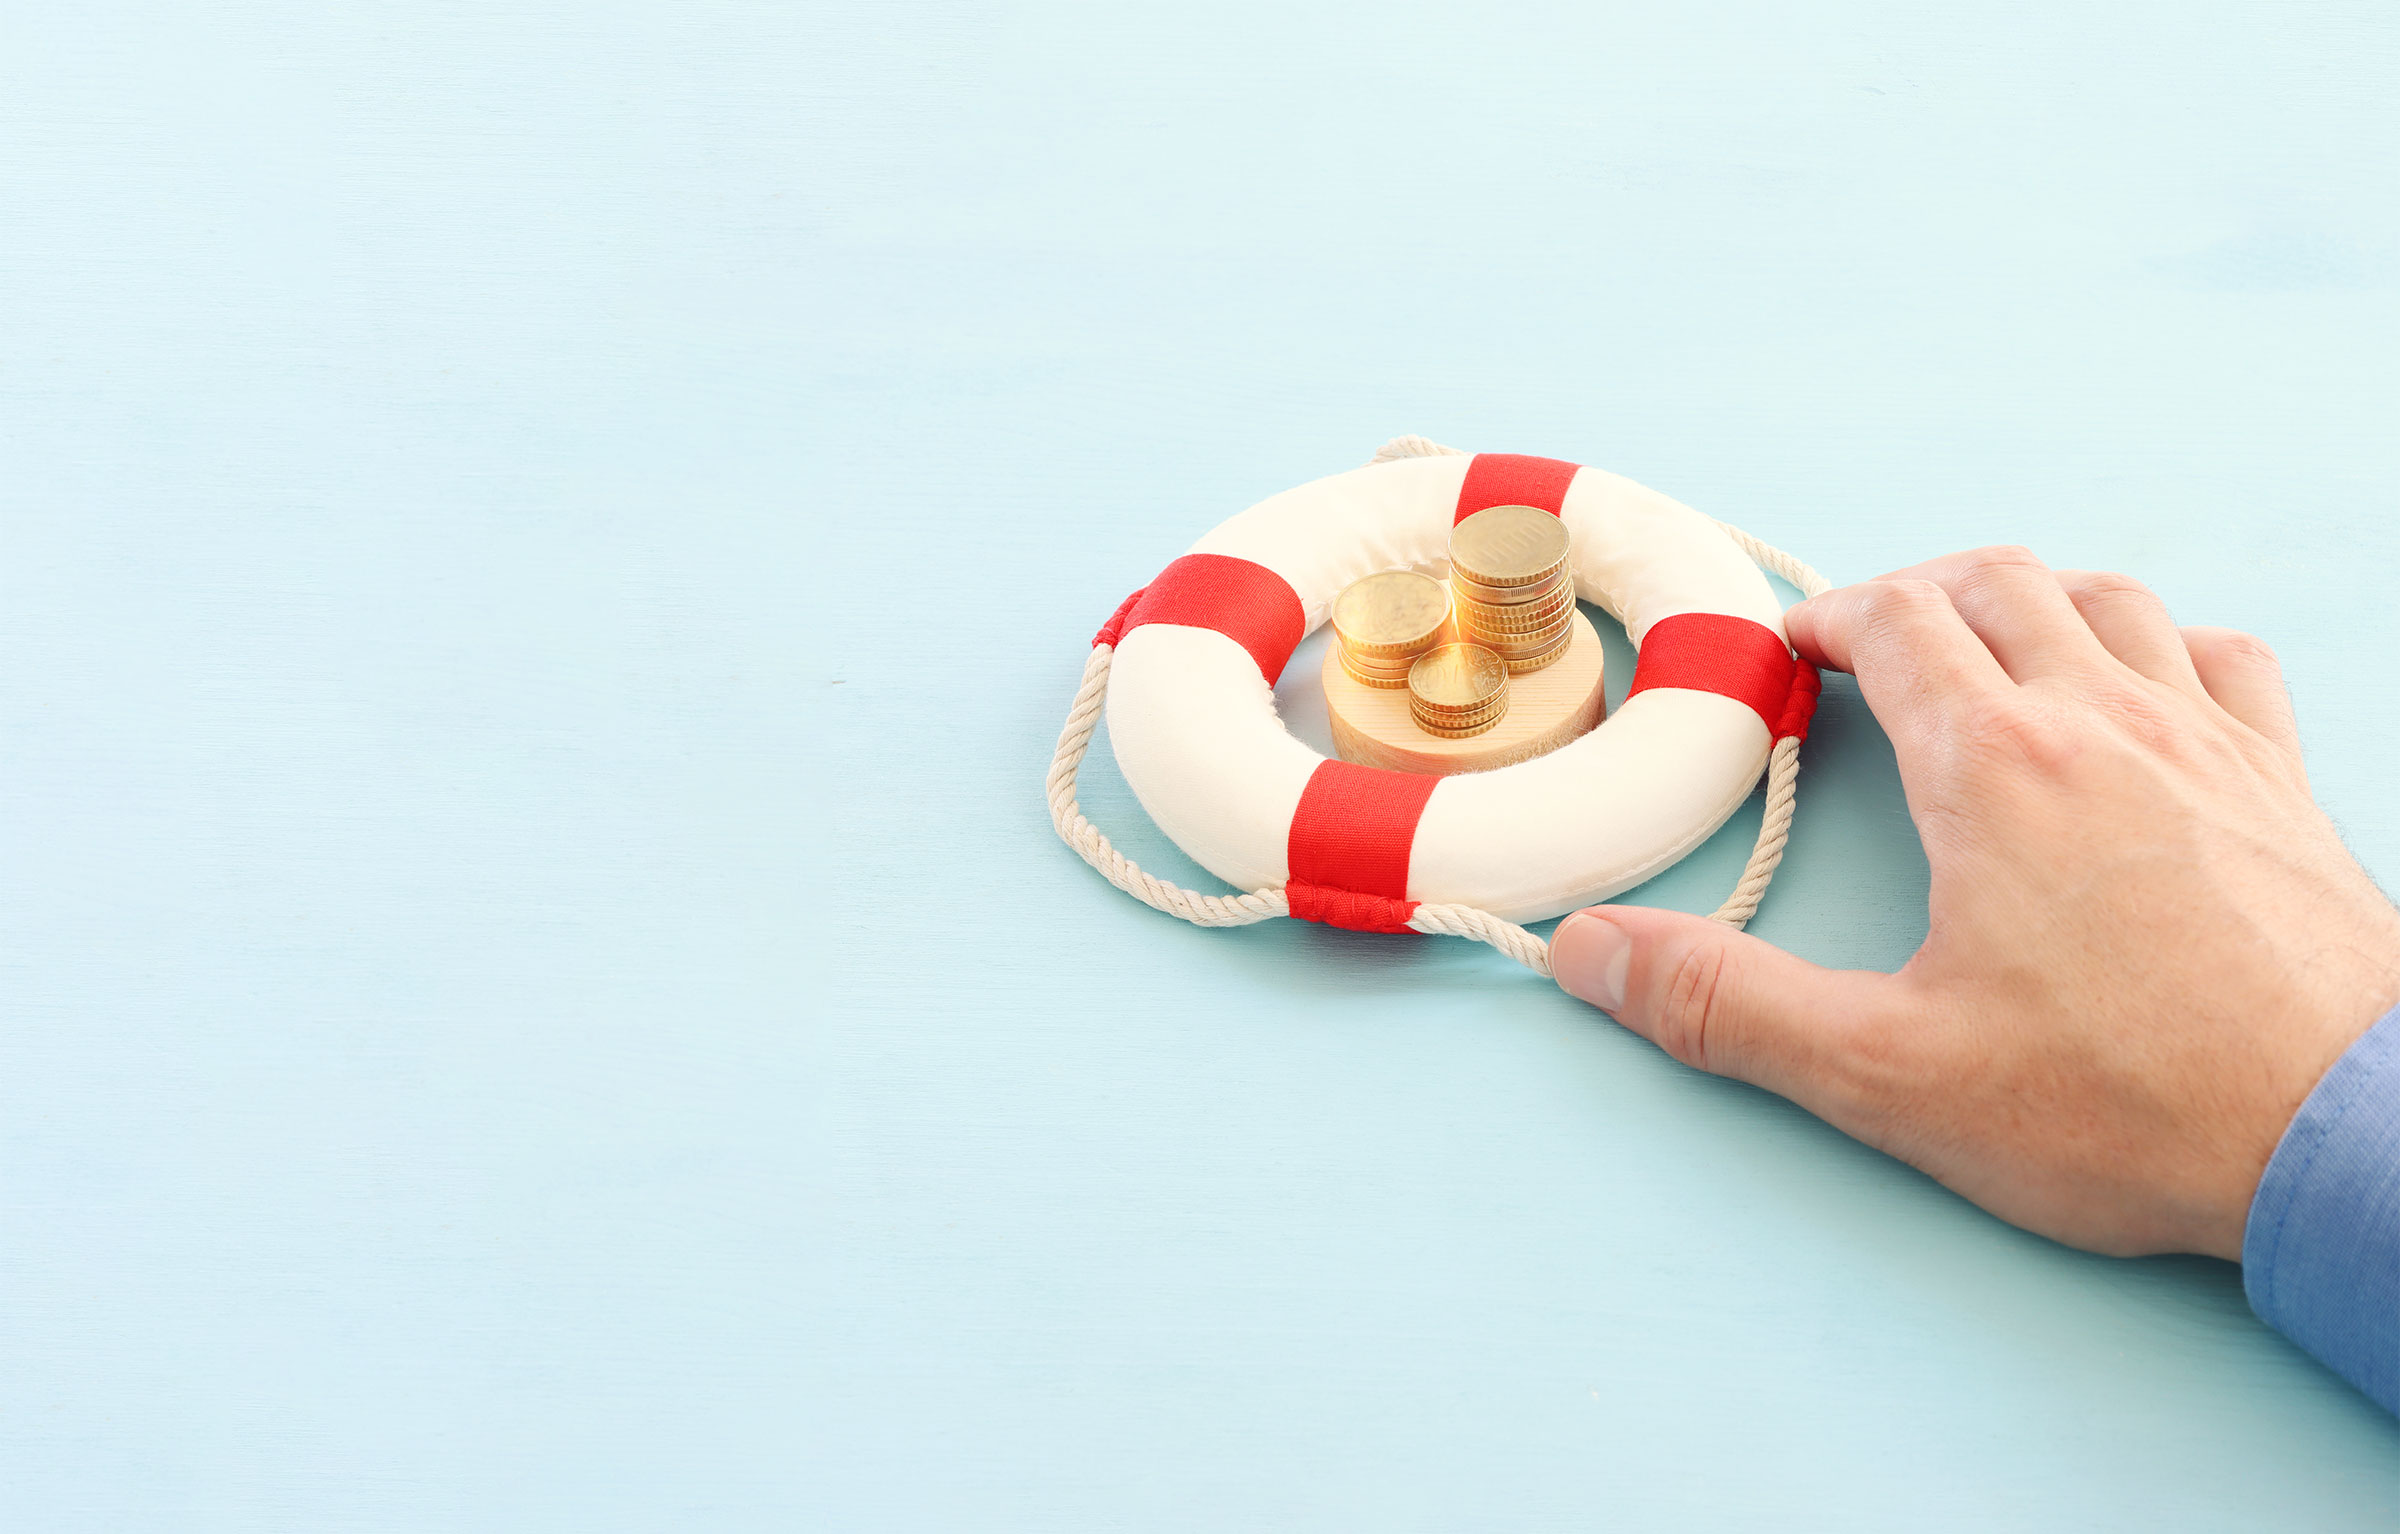 A man’s hand holds a tiny white and red striped life preserver that’s protecting a stack of coins.